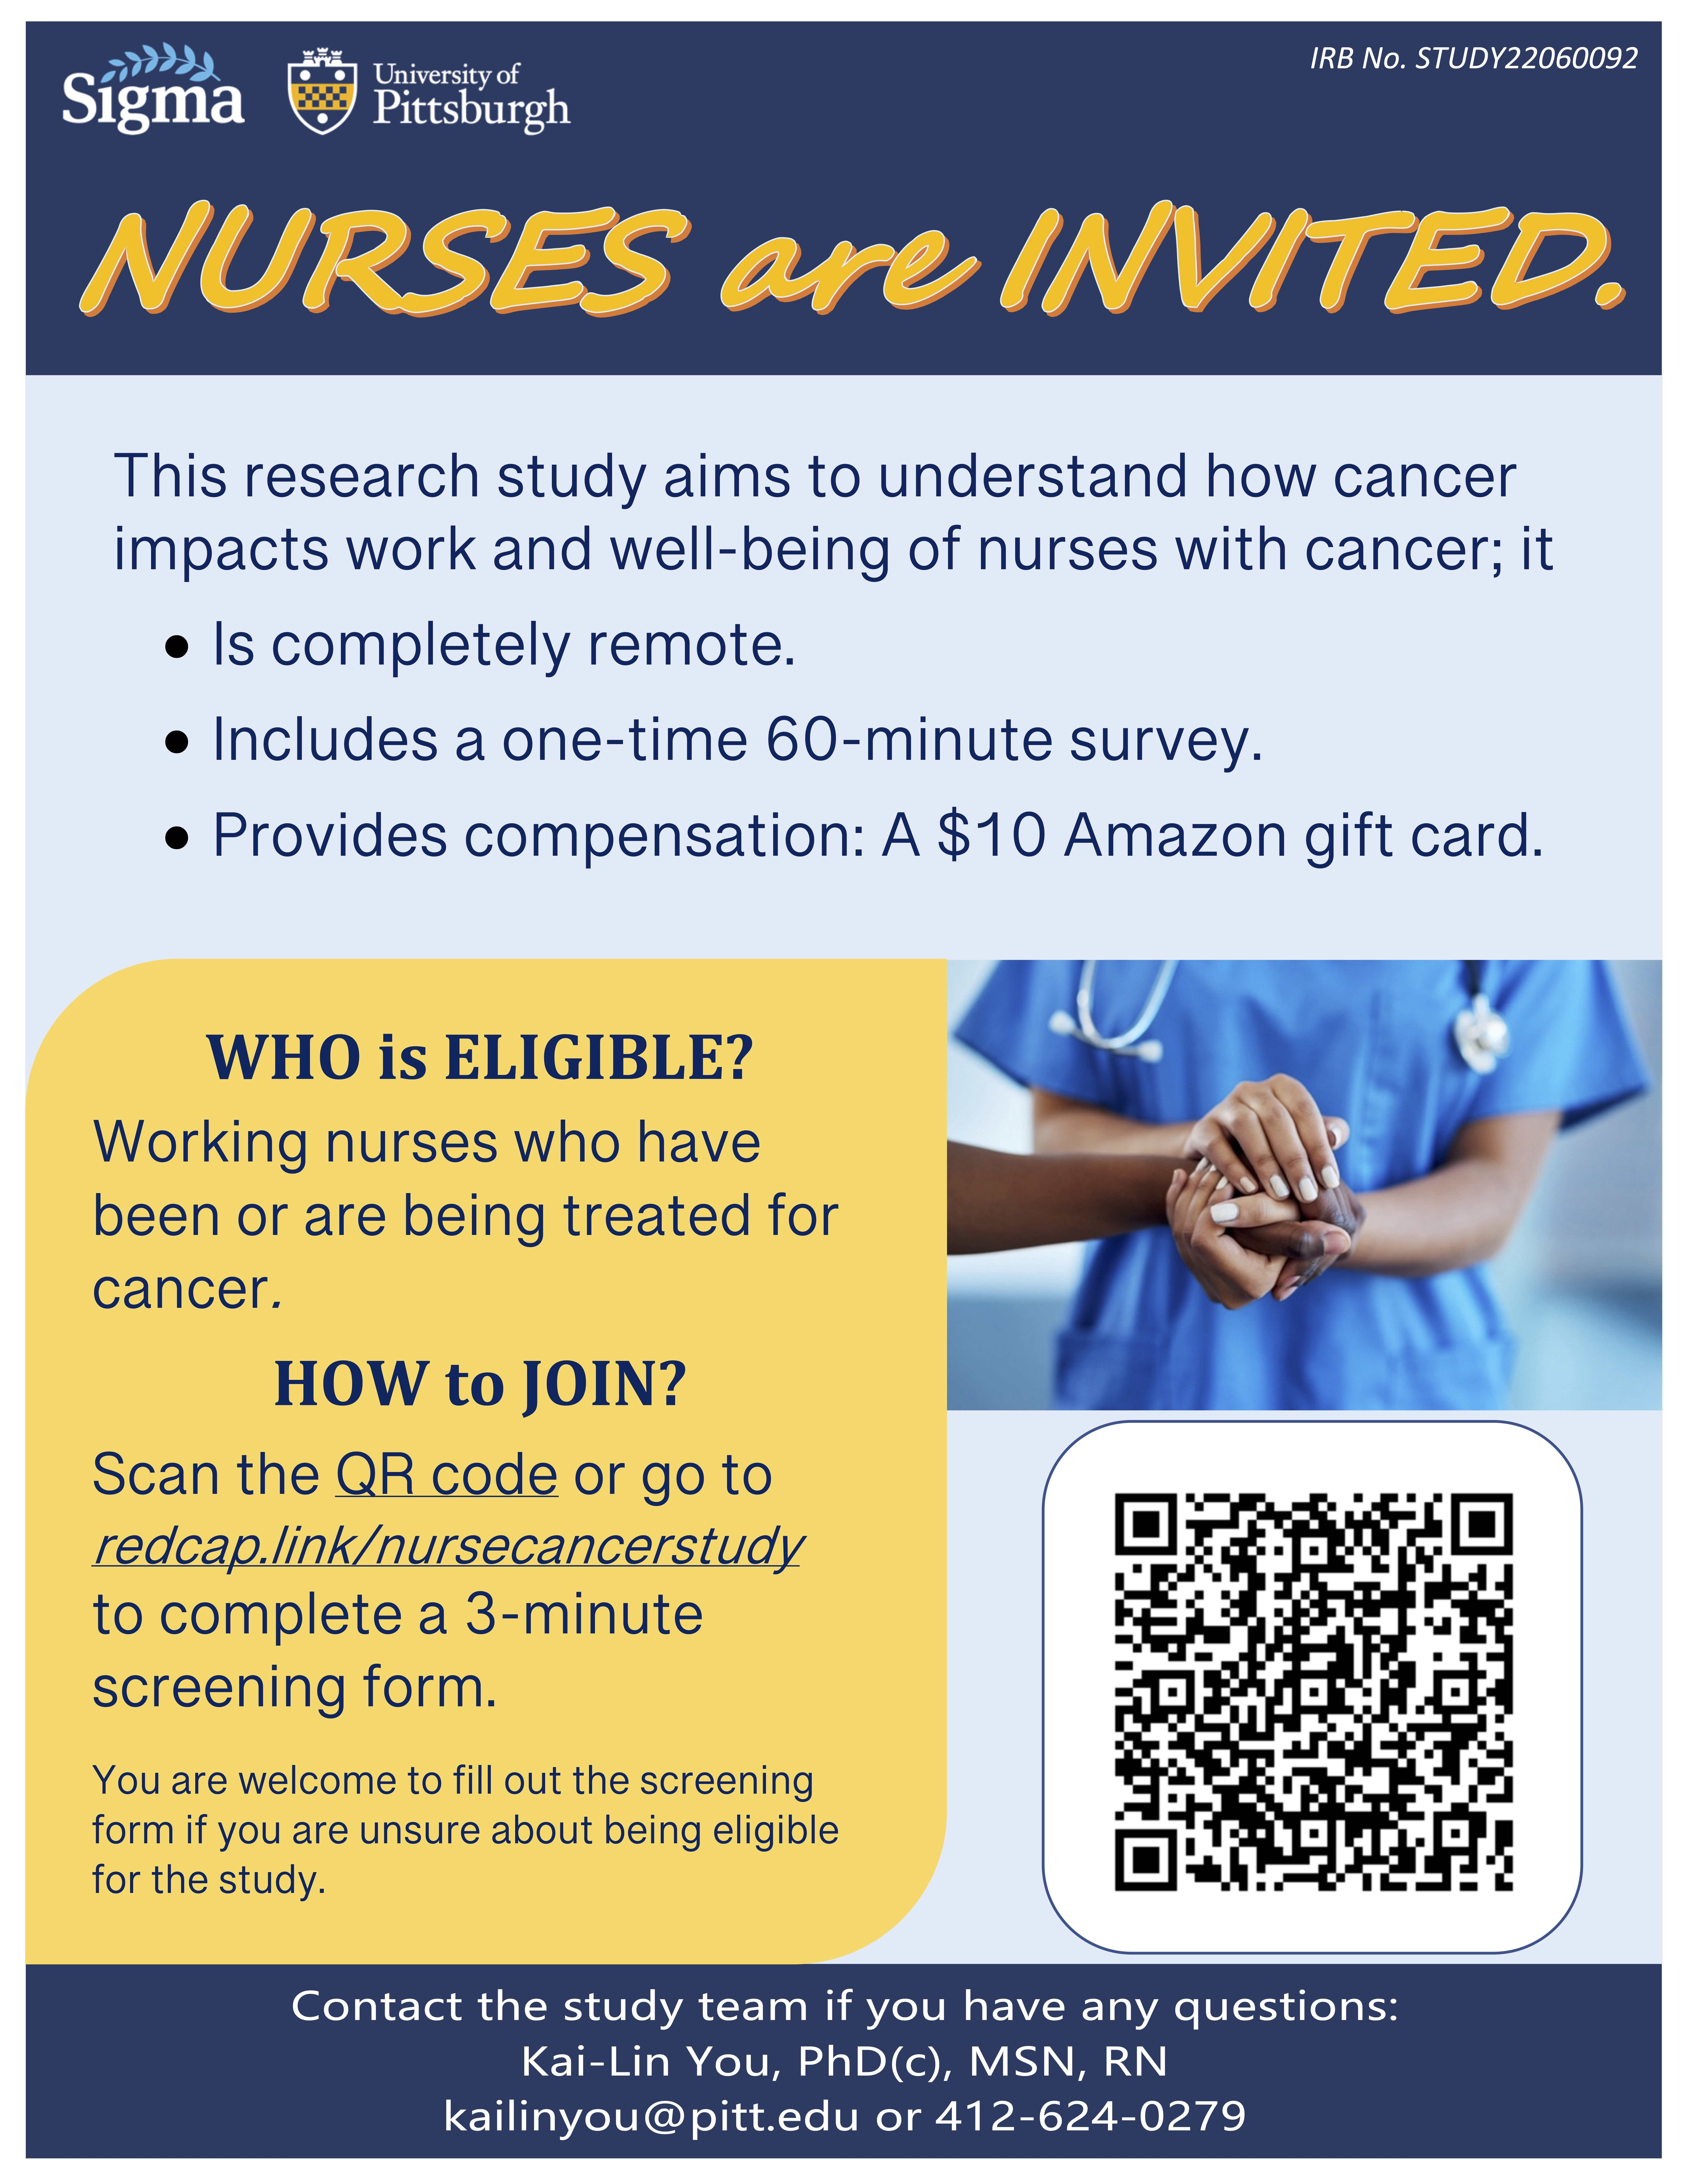 Calling nurses with cancer to join a research study